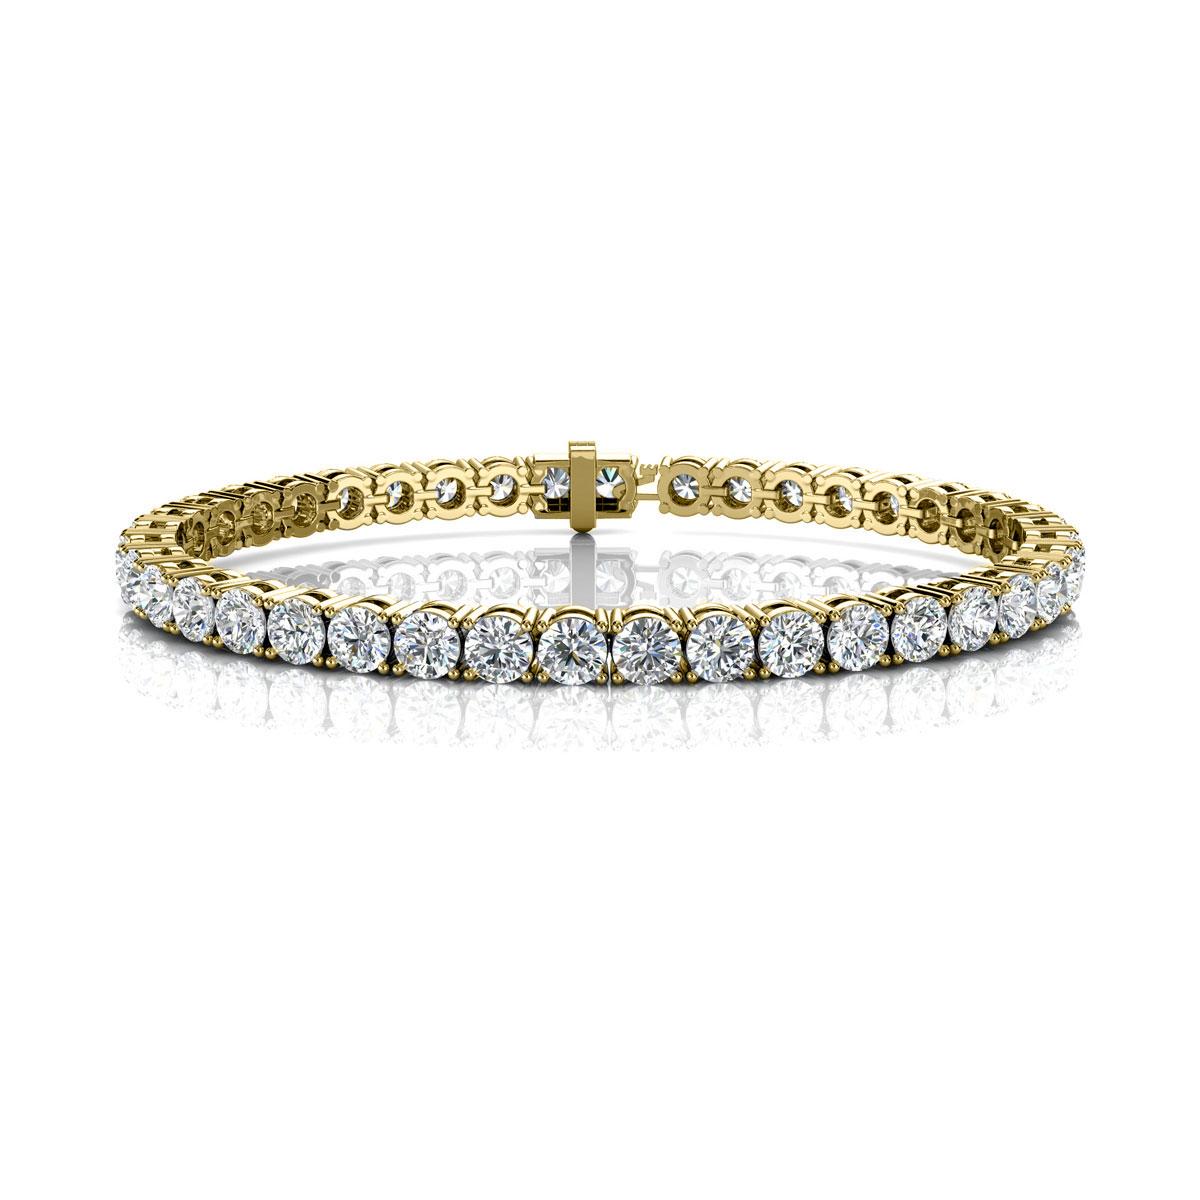 A timeless four prongs diamonds tennis bracelet. Experience the Difference!

Product details: 

Center Gemstone Type: NATURAL DIAMOND
Center Gemstone Color: WHITE
Center Gemstone Shape: ROUND
Center Diamond Carat Weight: 10
Metal: 18K Yellow